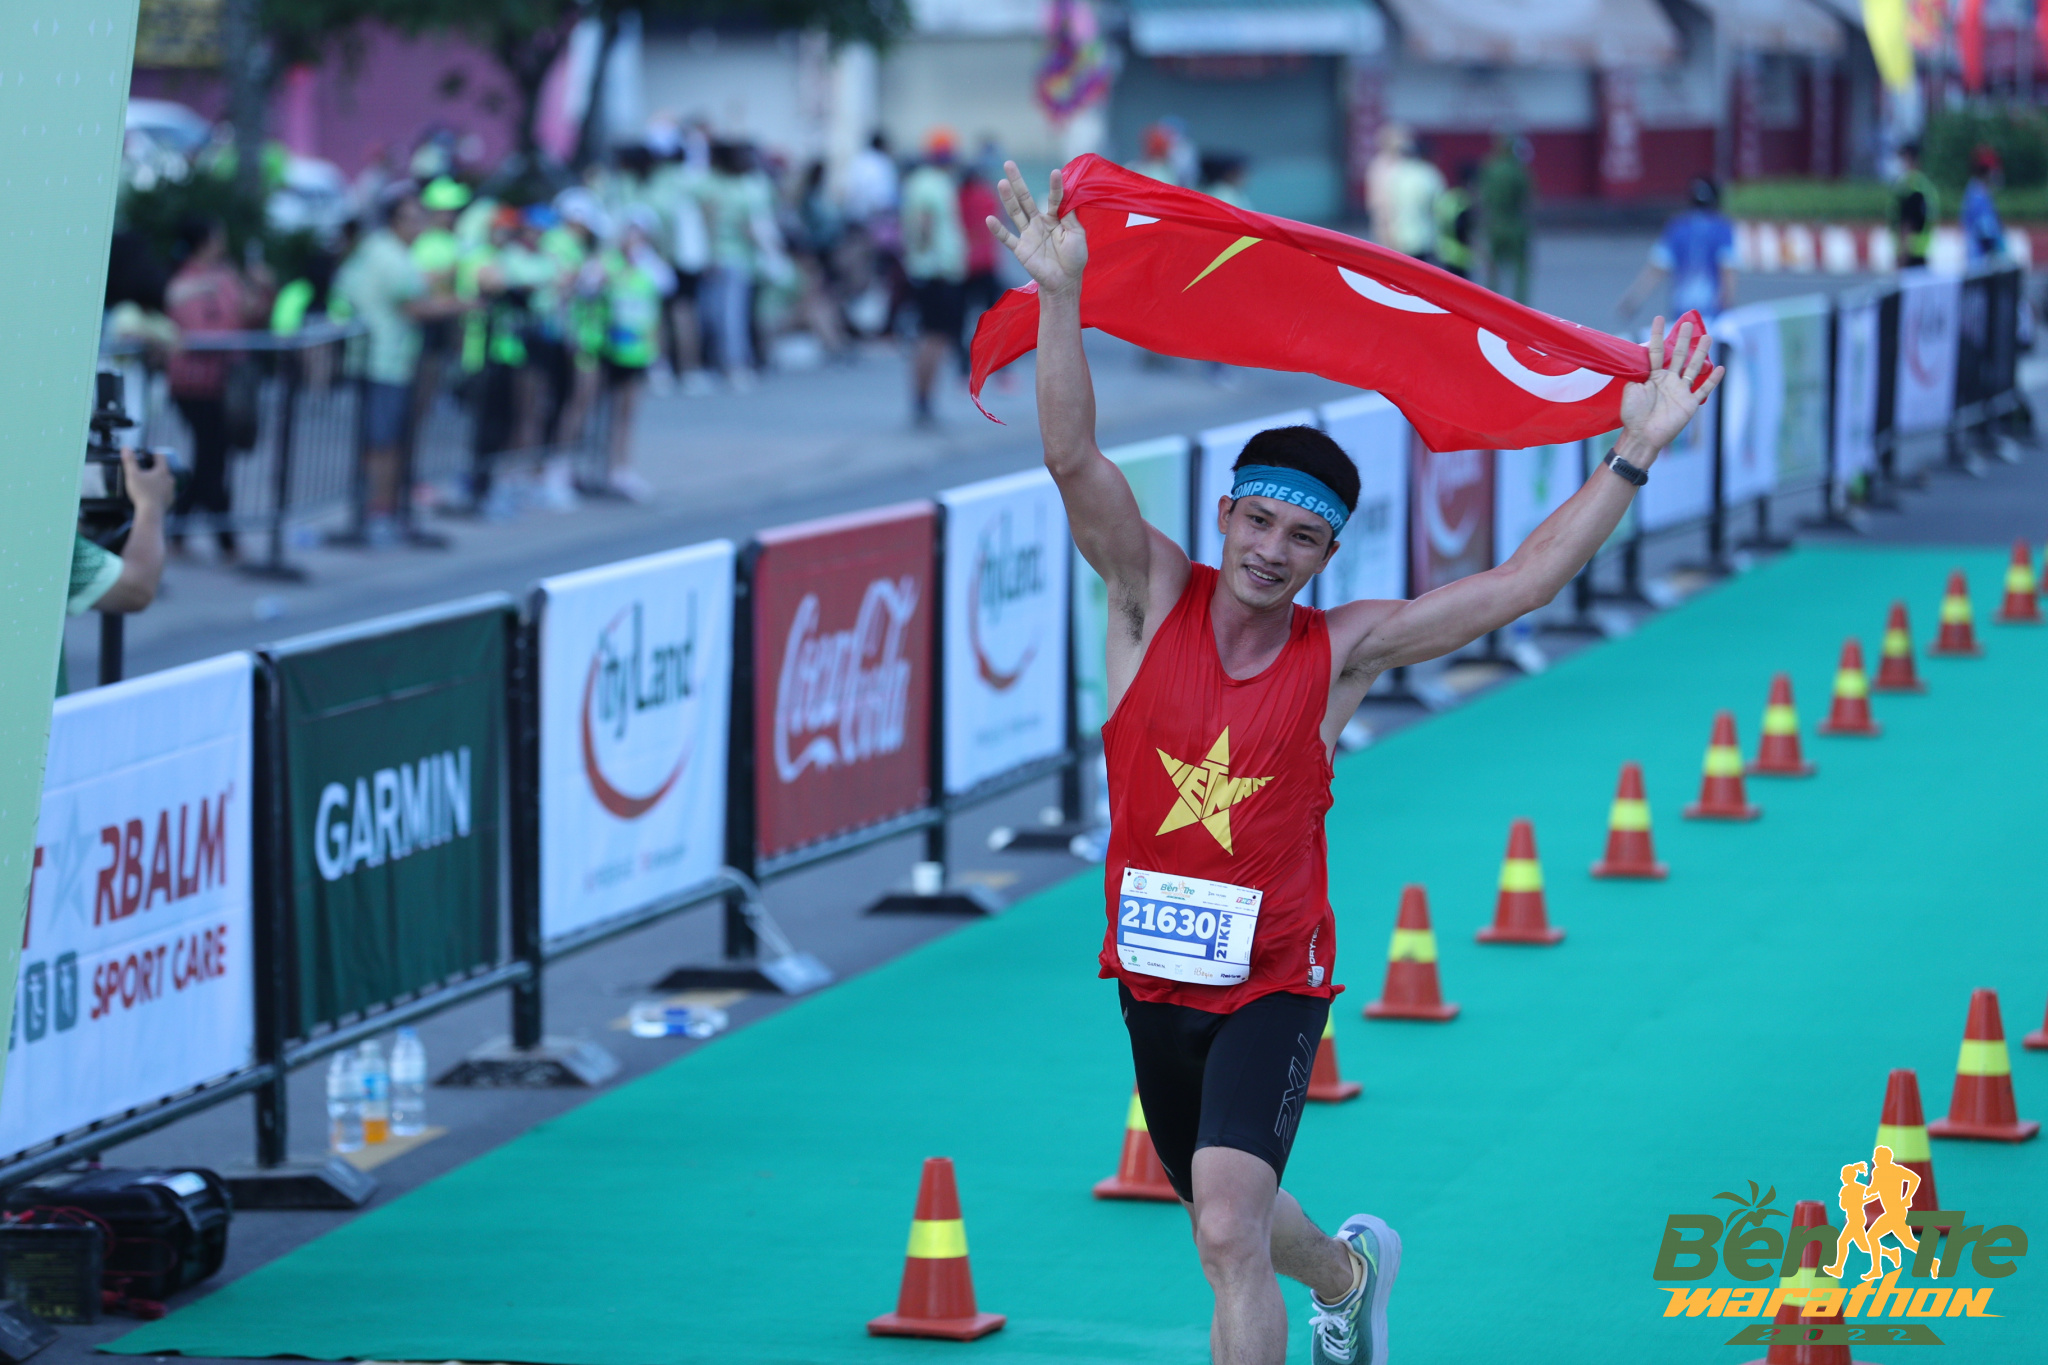 A runner reacts after crossing the finish line at the 2022 Ben Tre Marathon in Ben Tre Province, Vietnam, June 26, 2022. Photo: M.Q. / Tuoi Tre